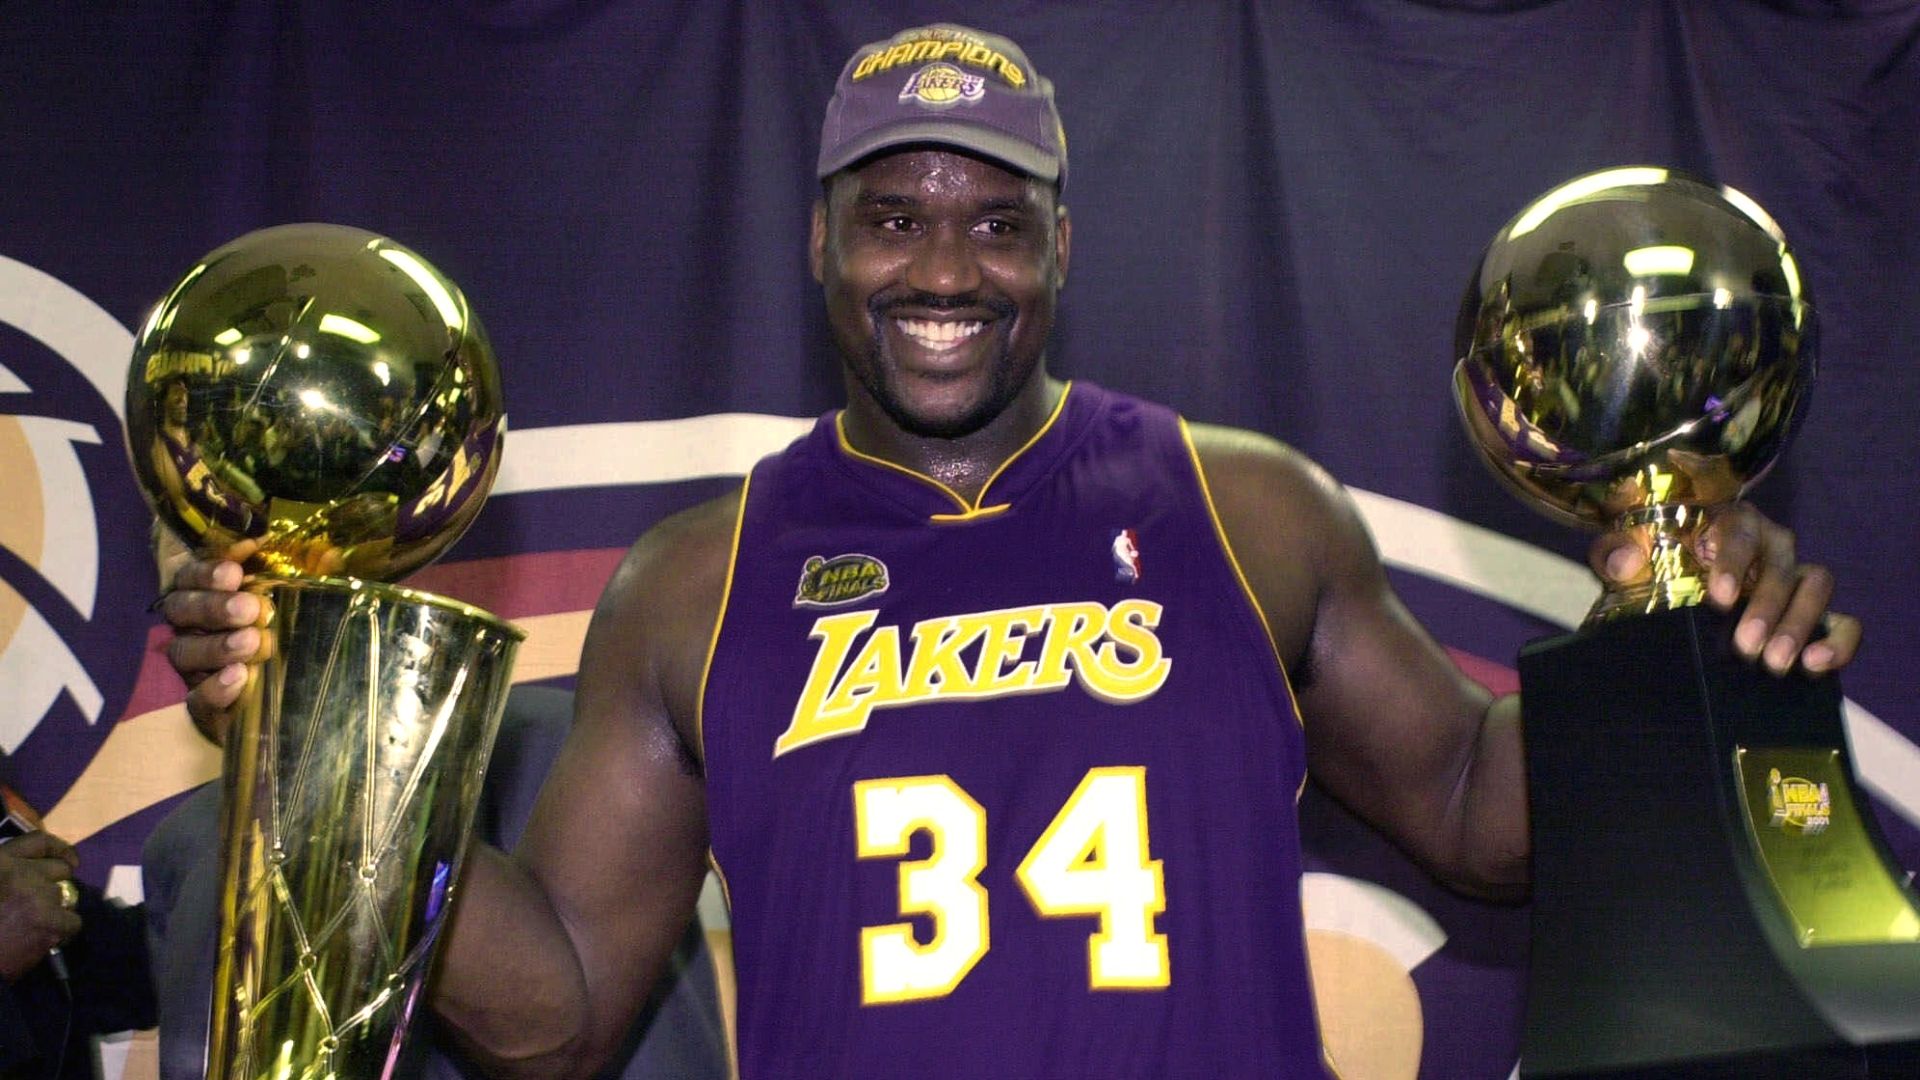 ESPN - Never forget the Shaq-tiful rainbow 😄 Shaquille O' Neal